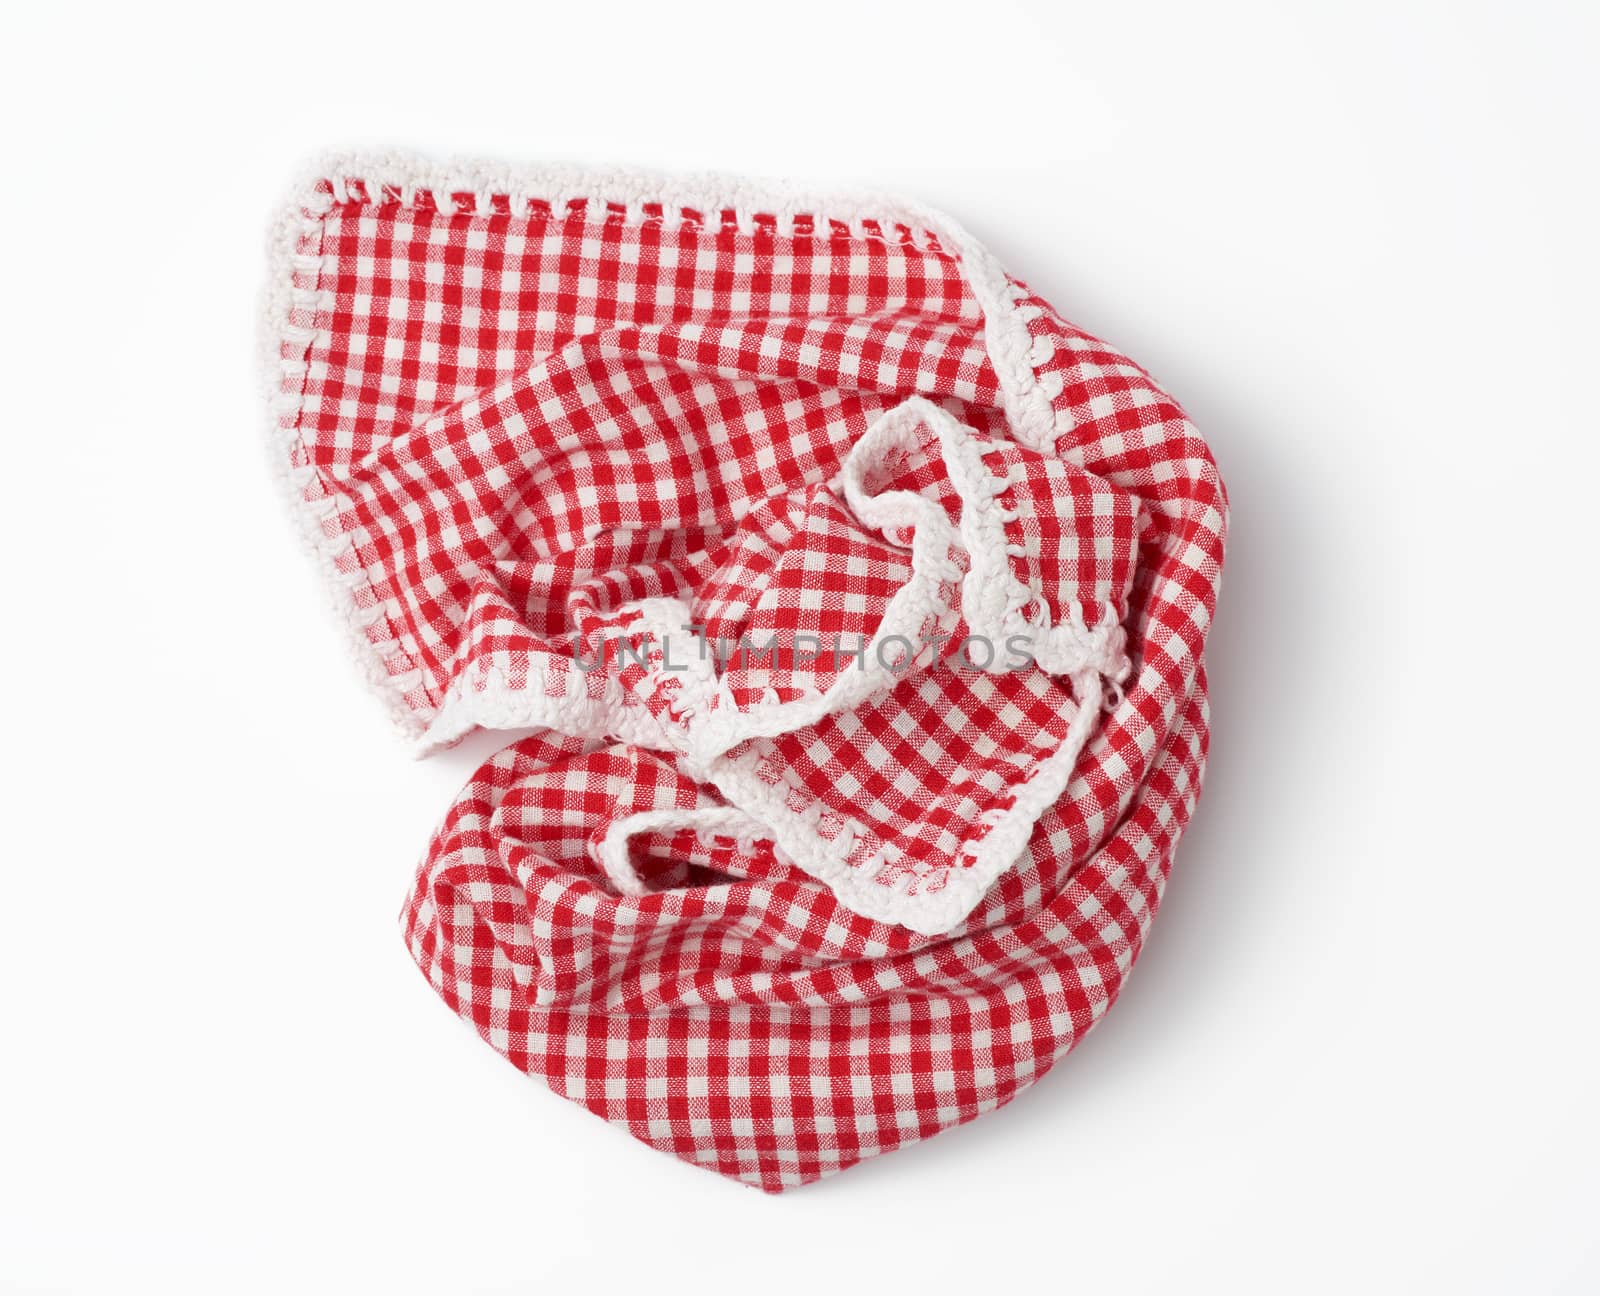 crumpled kitchen red-white towel in on a white background by ndanko